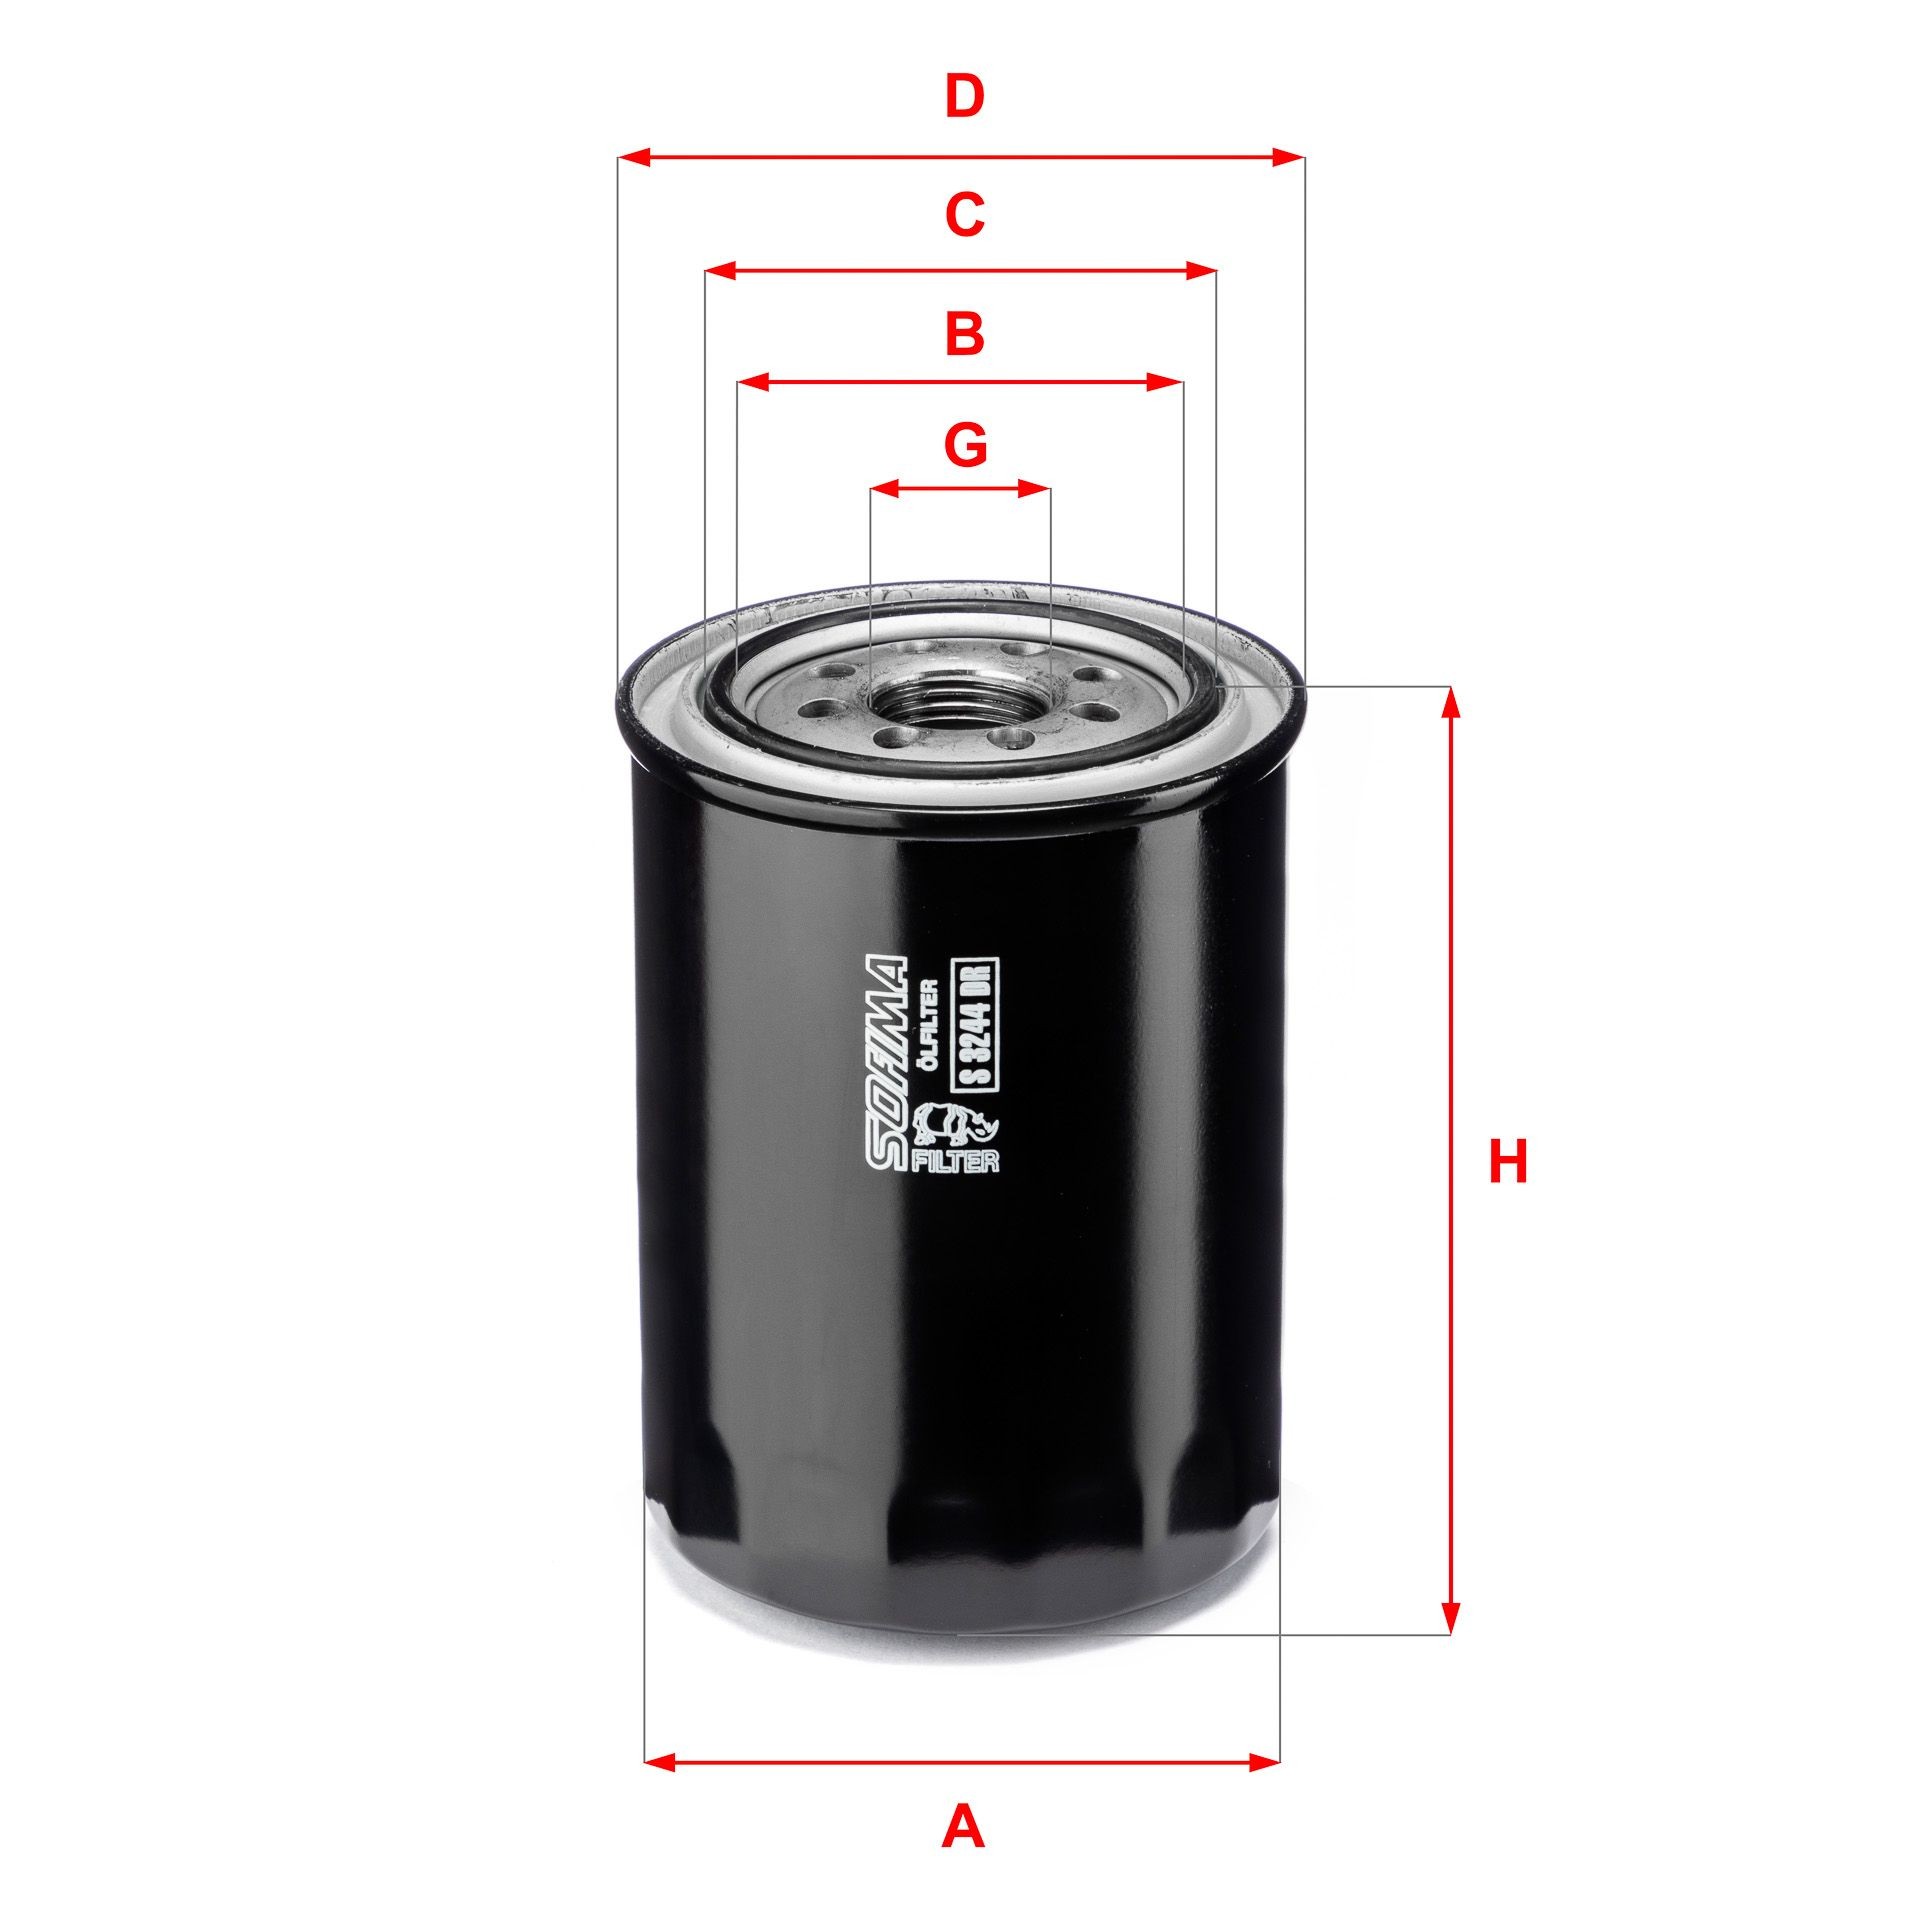 SOFIMA 1-12 UNF, with one anti-return valve, Spin-on Filter Inner Diameter 2: 66,5mm, Outer Diameter 2: 72,5mm, Ø: 93, 96,8mm, Height: 132mm Oil filters S 3244 DR buy